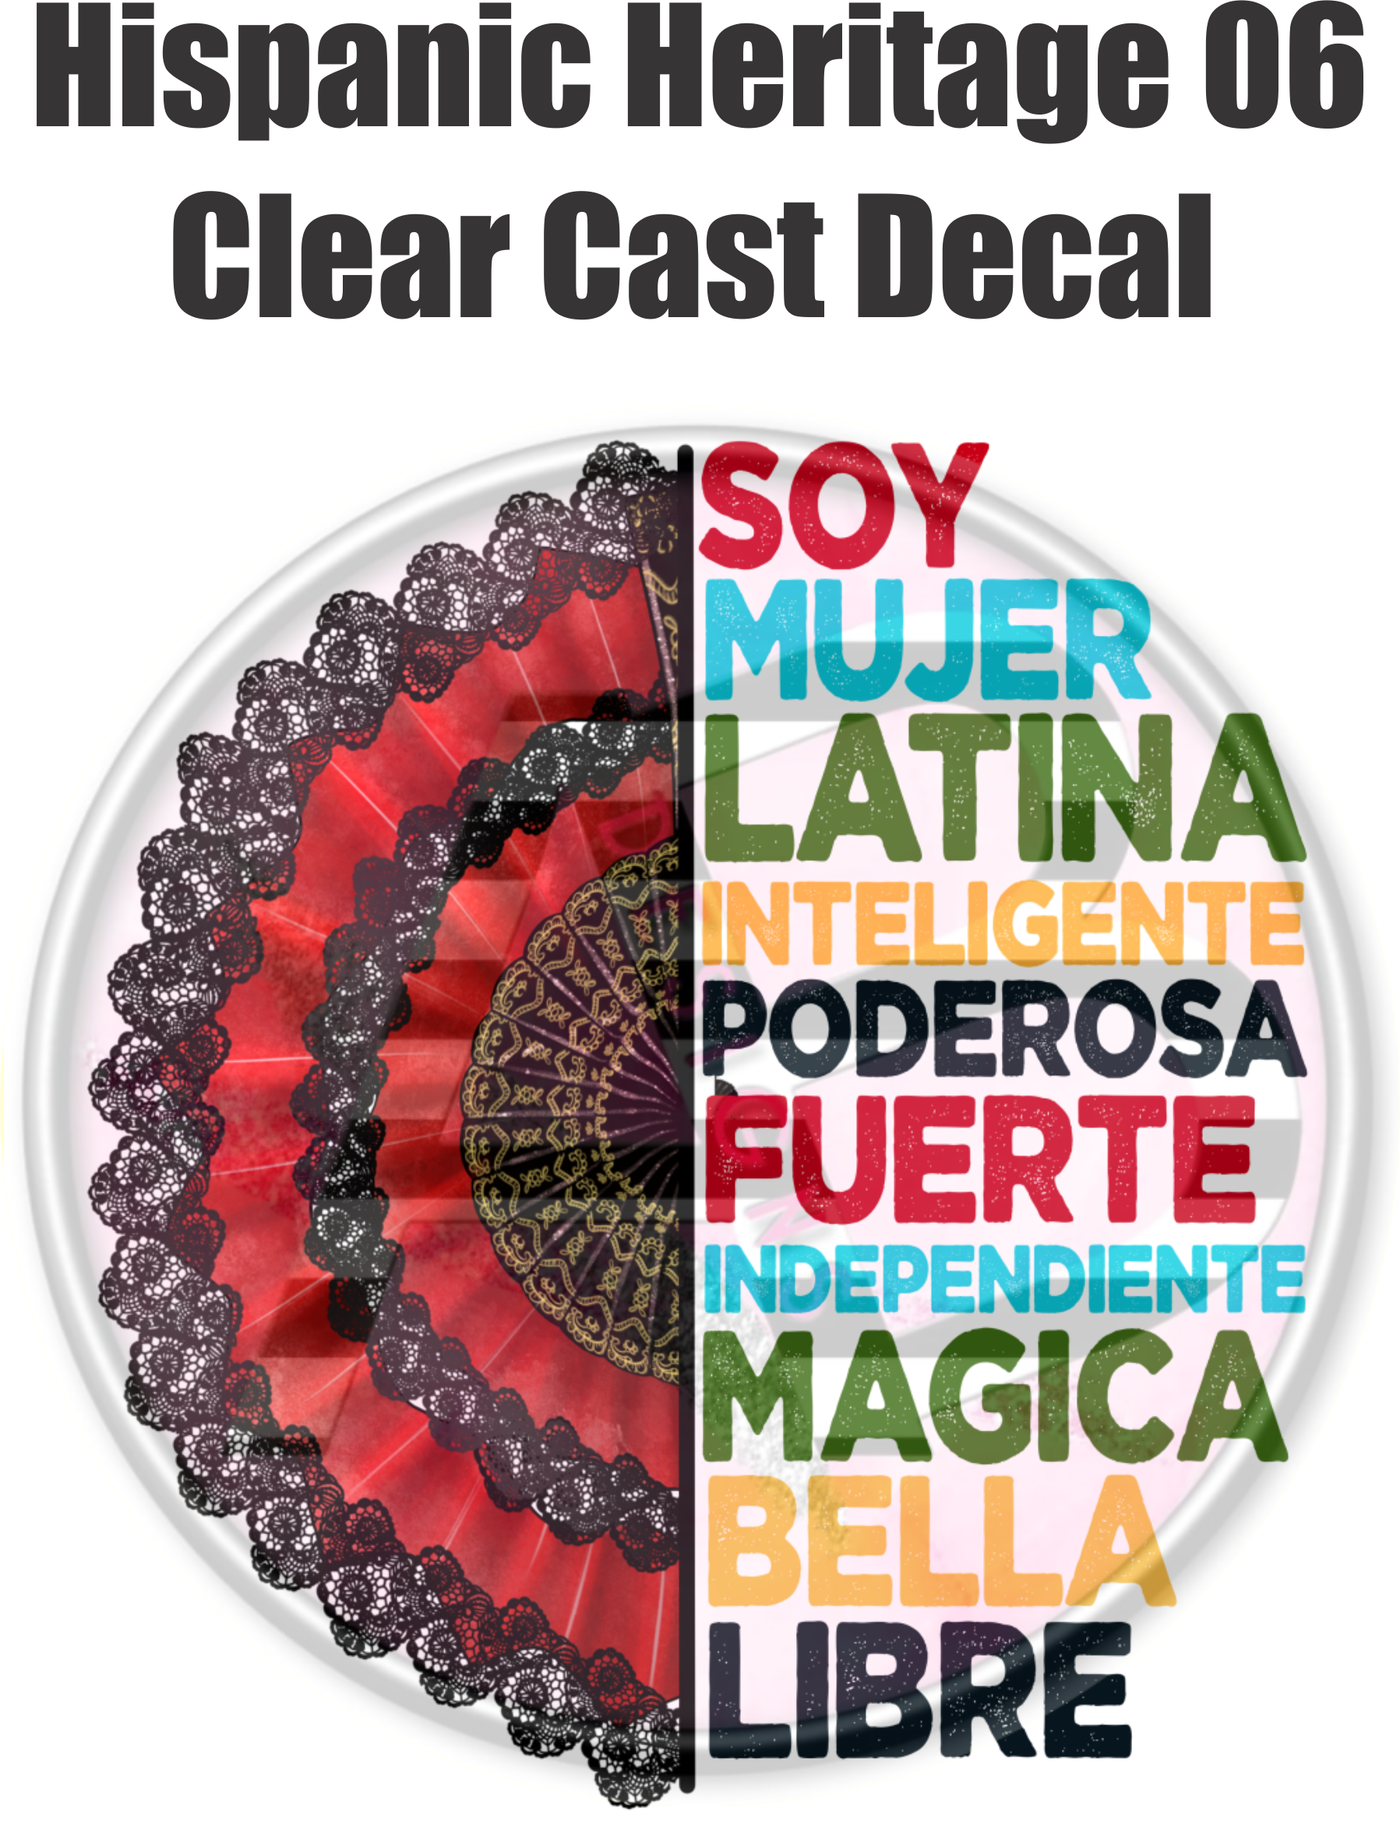 Hispanic Heritage 06 - Clear Cast Decal